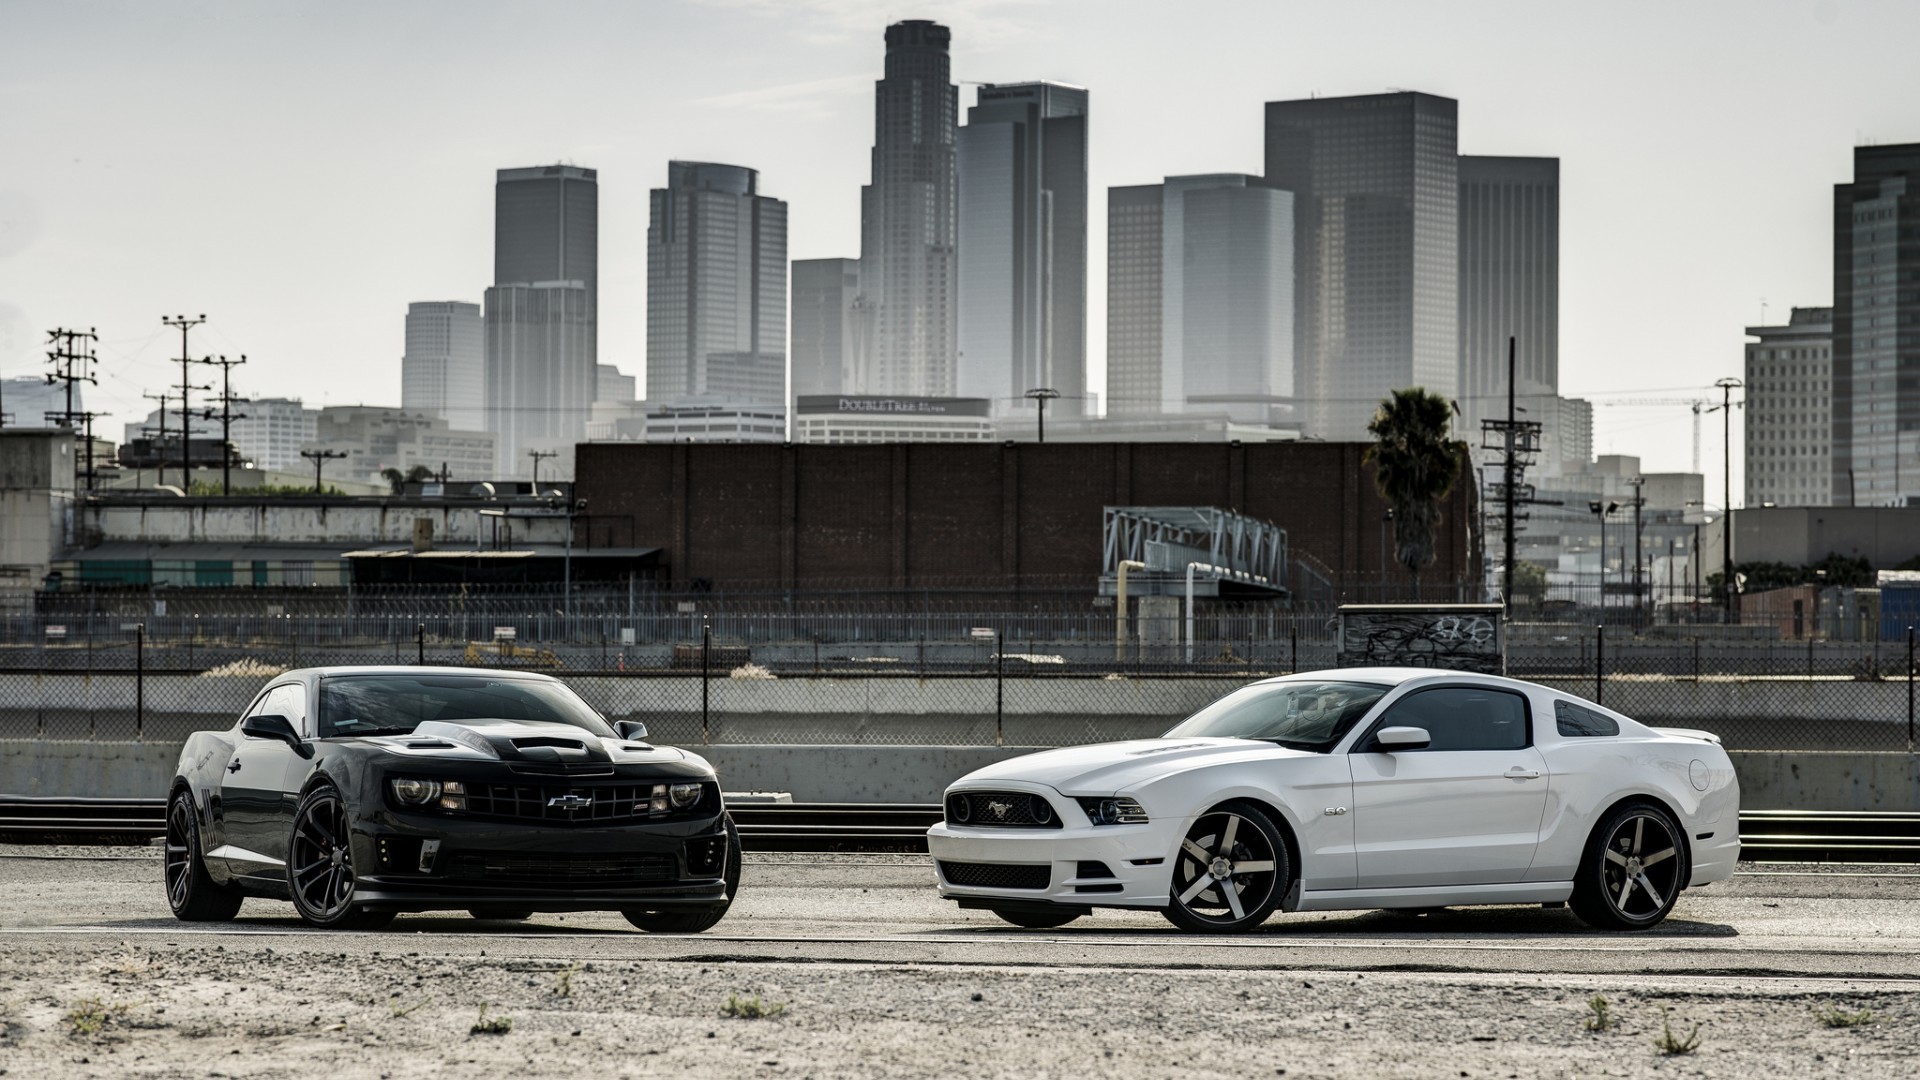 General 1920x1080 muscle cars Chevrolet city Ford Mustang Ford black cars white cars cityscape urban car vehicle Ford Mustang S-197 II American cars